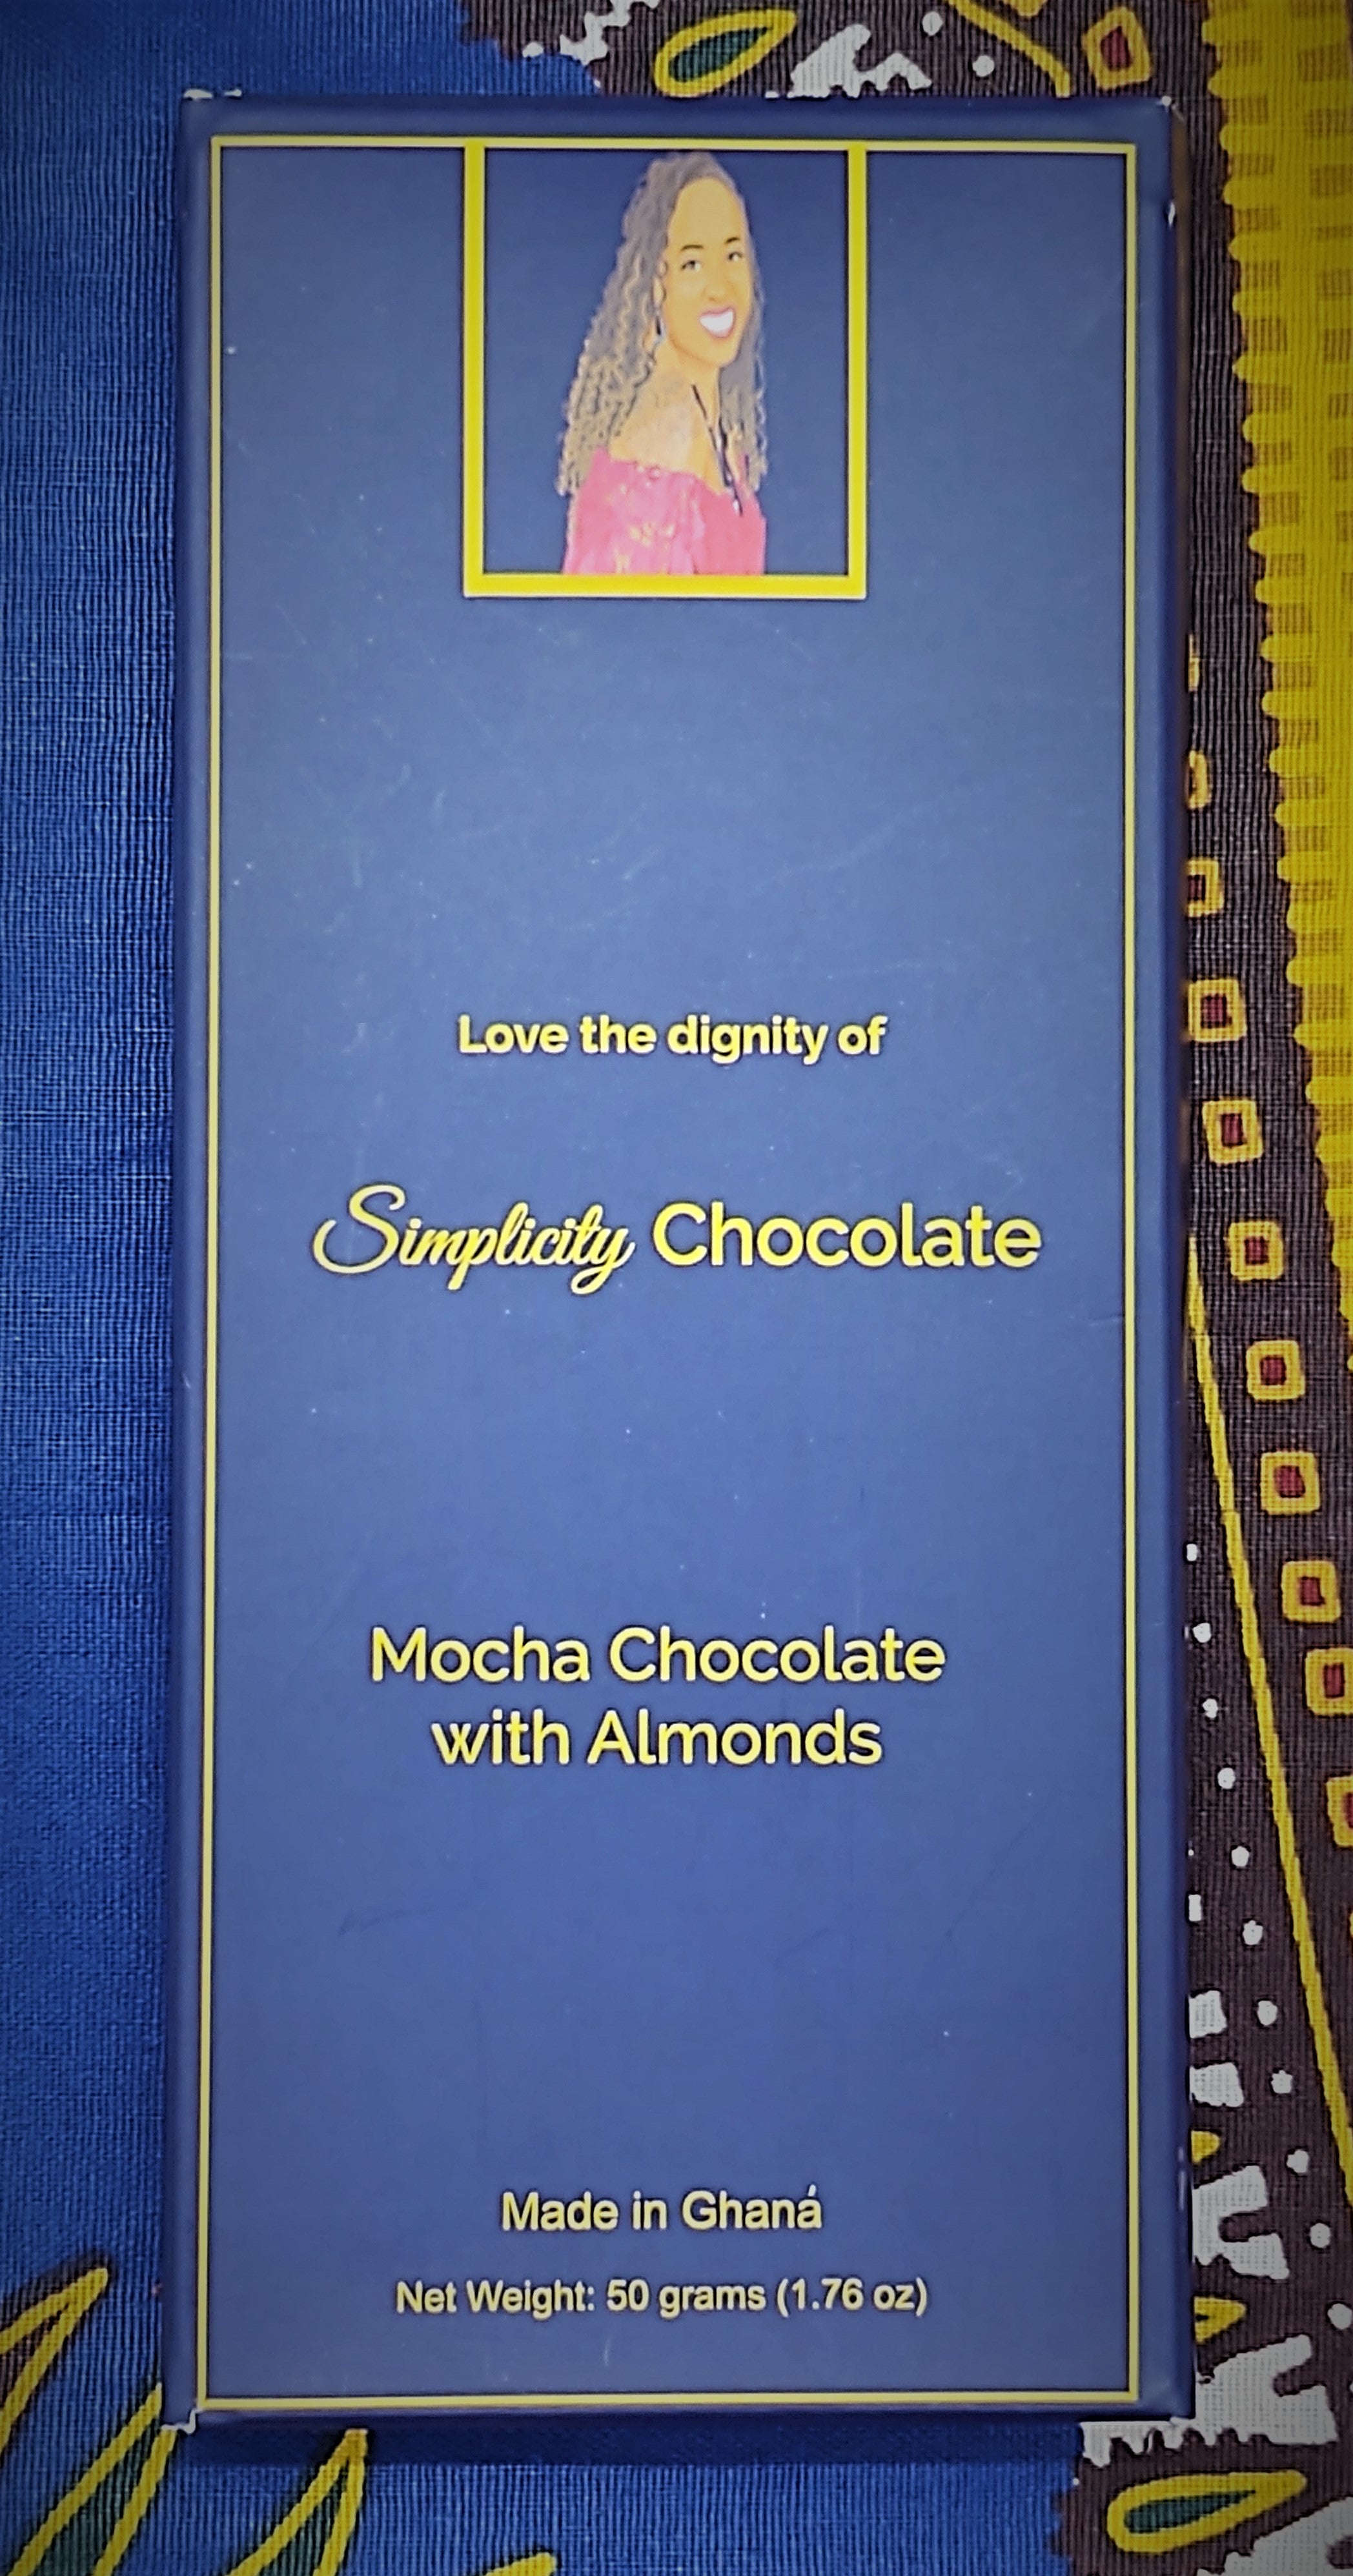 Pictured: The Simplicity Chocolate bar wrapped in complete packaging which consists of a dark blue box with gold writing. A portrait of the CEO is centered at the top of the packaging. The CEO is seated, looking over her right shoulder, wearing a magenta, off the shoulder top and a royal blue gemstone necklace with matching earrings. The packaging reads, "Love the dignity of Simplicity Chocolate" in the center of the package. Mocha Chocolate with Almonds. Made in Ghana. Net Weight: 50 grams (1.76 oz).